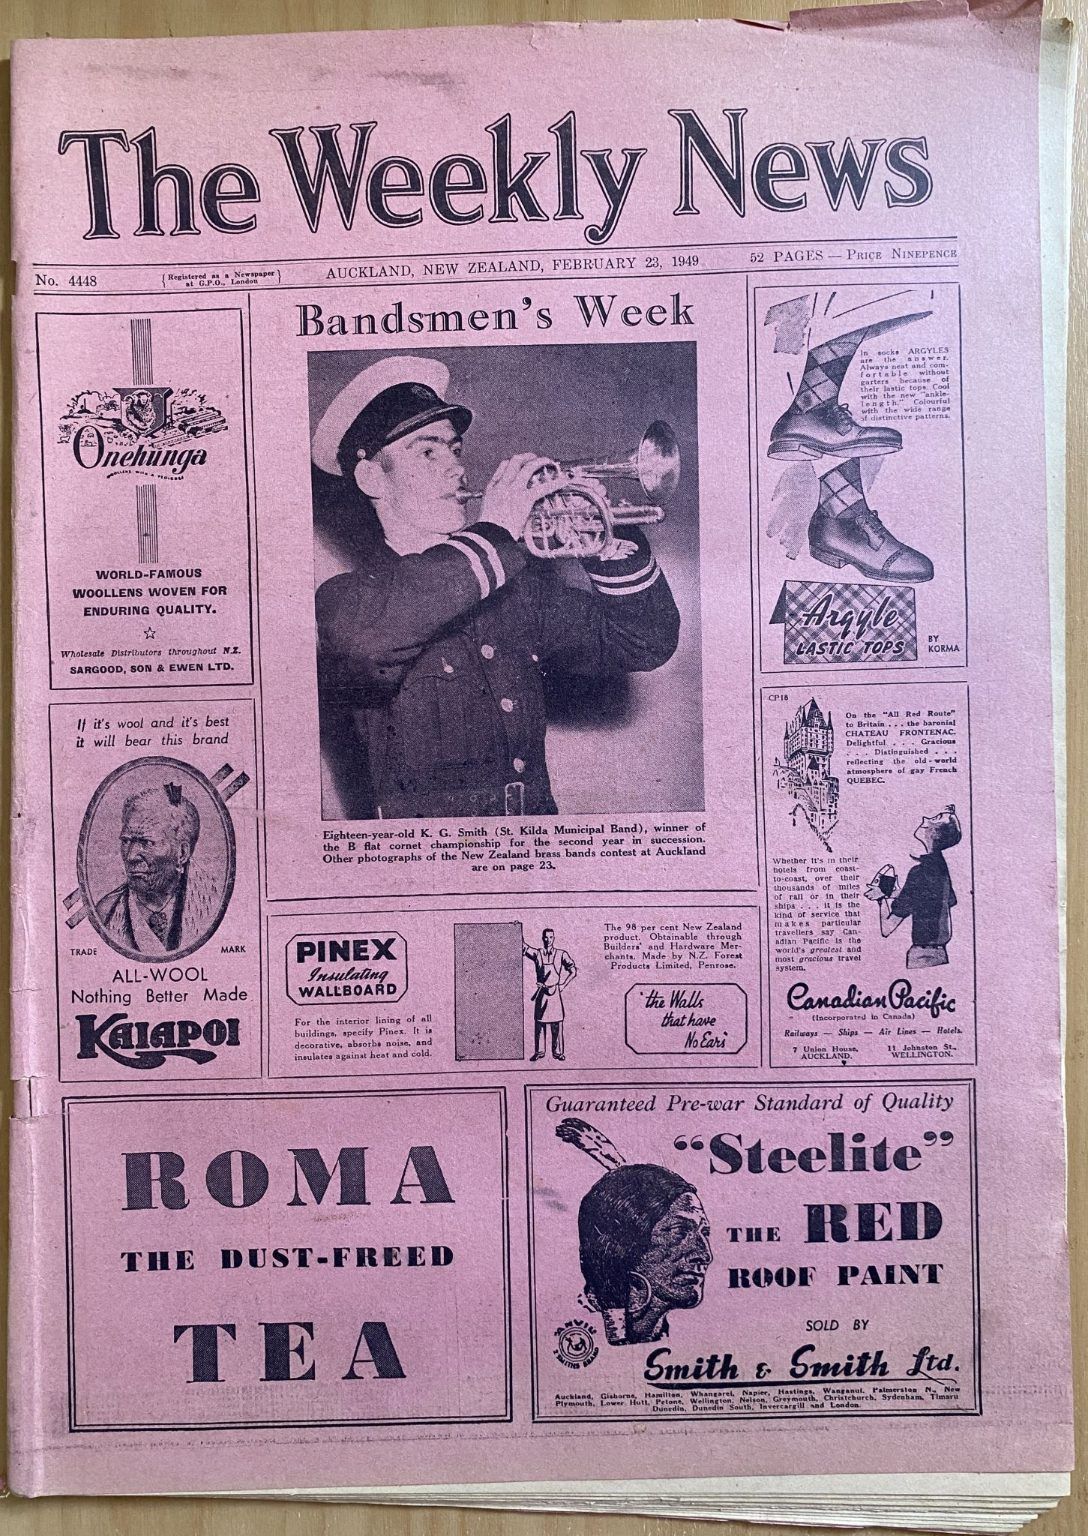 OLD NEWSPAPER: The Weekly News, No. 4448, 23 February 1949